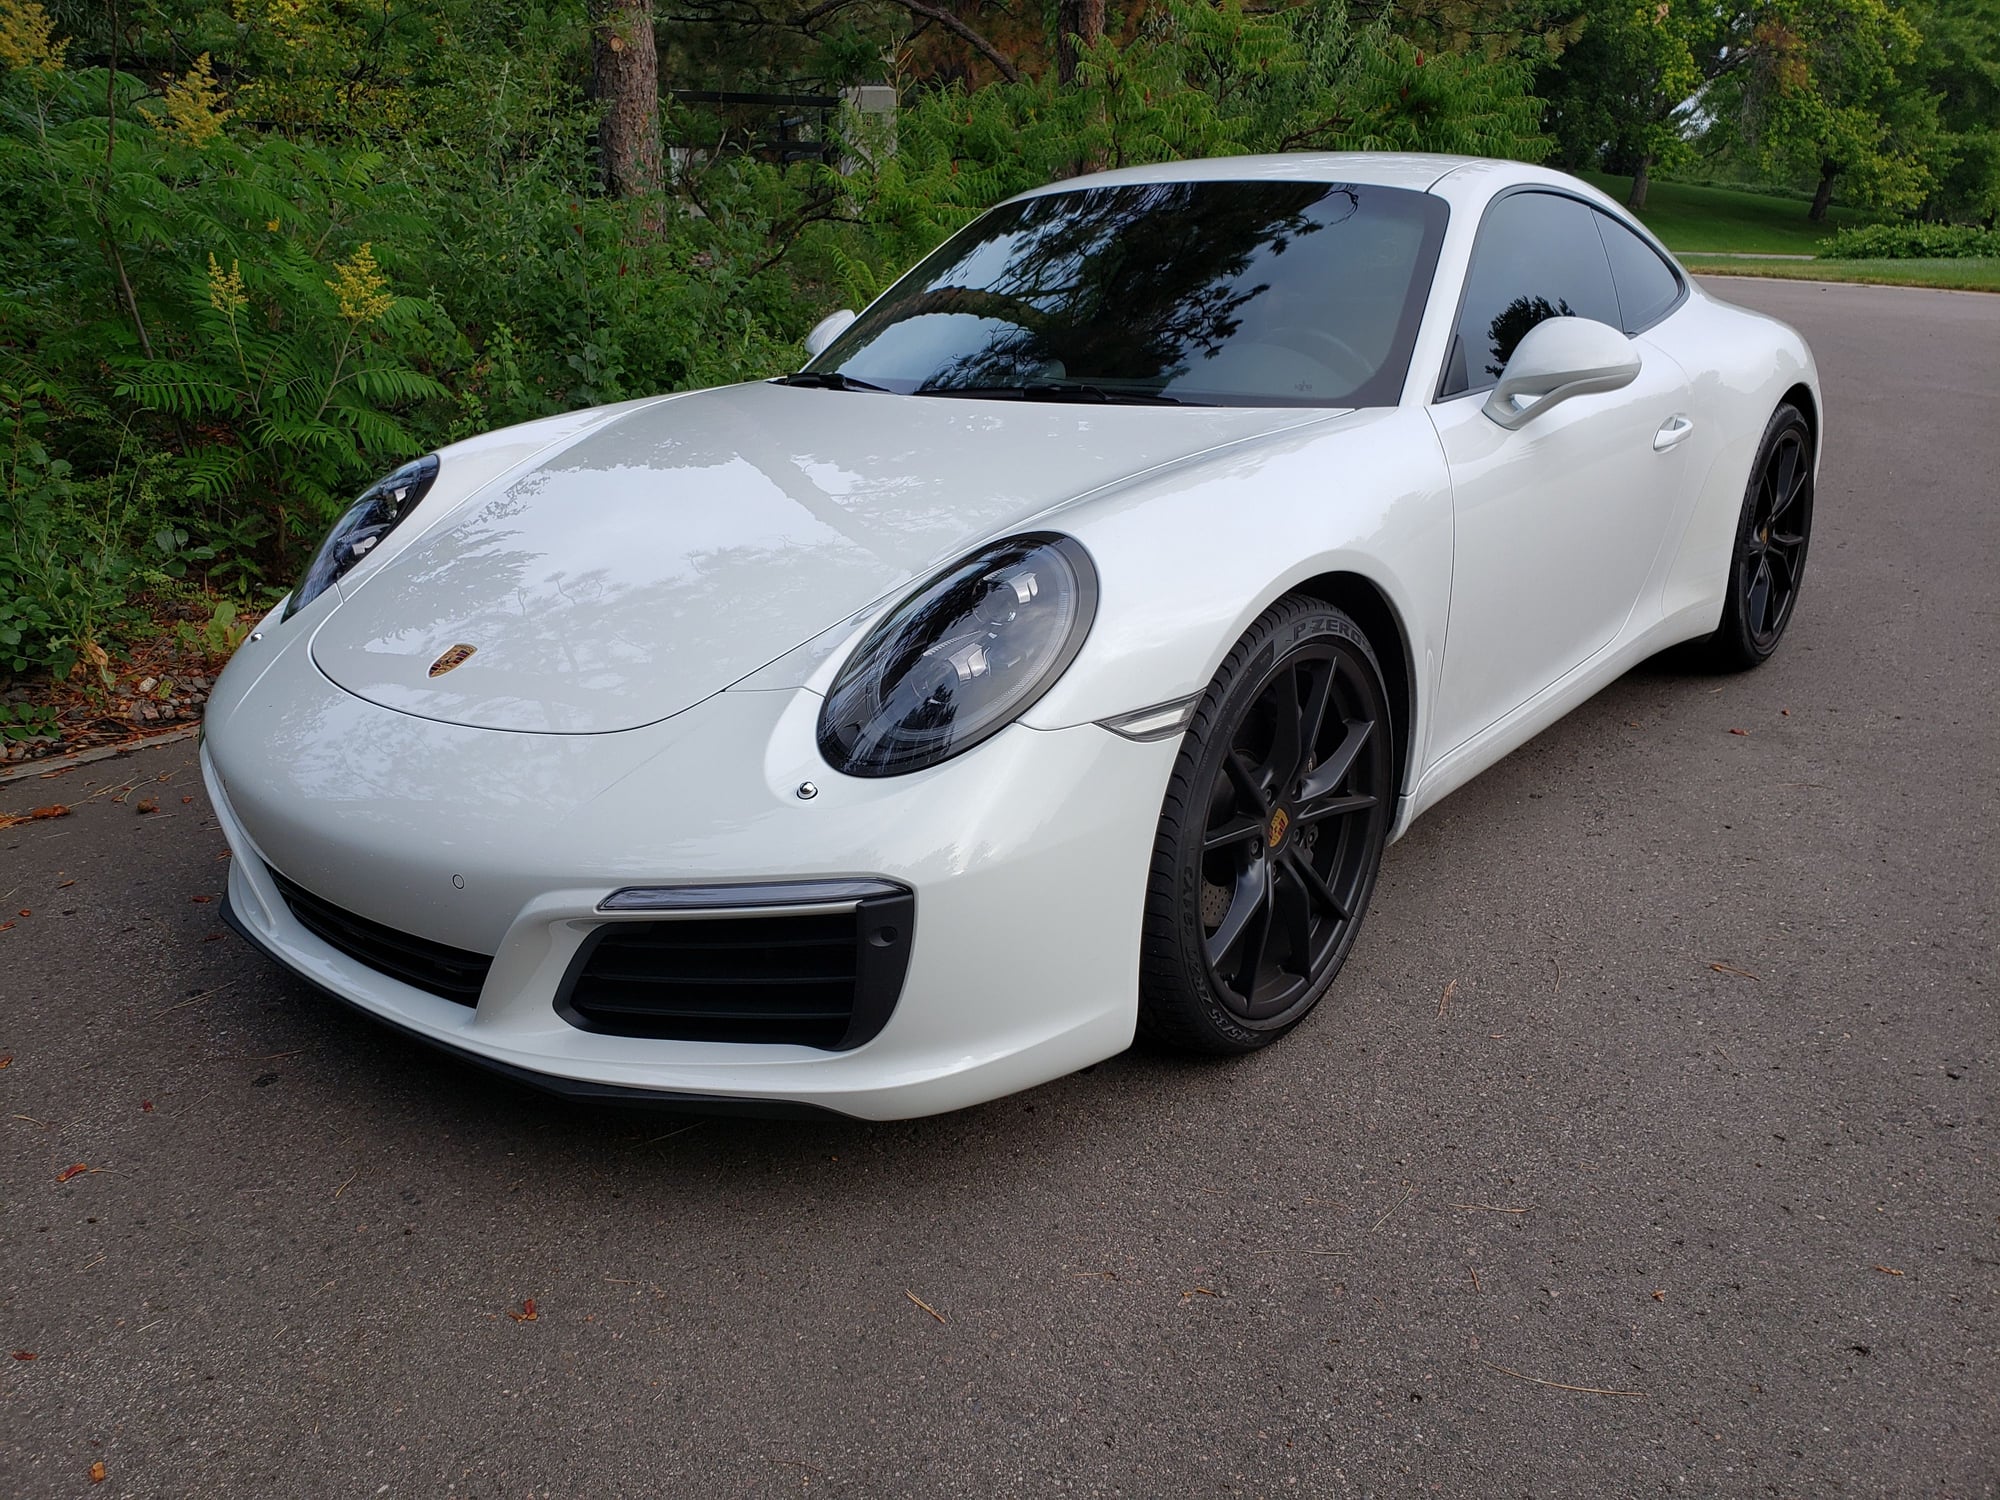 2017 Porsche 911 - 2017 911 (991.2) CPO MANUAL C2 - Used - VIN WP0AA2A94HS107594 - 19,760 Miles - 6 cyl - 2WD - Manual - Coupe - White - Centennial, CO 80111, United States